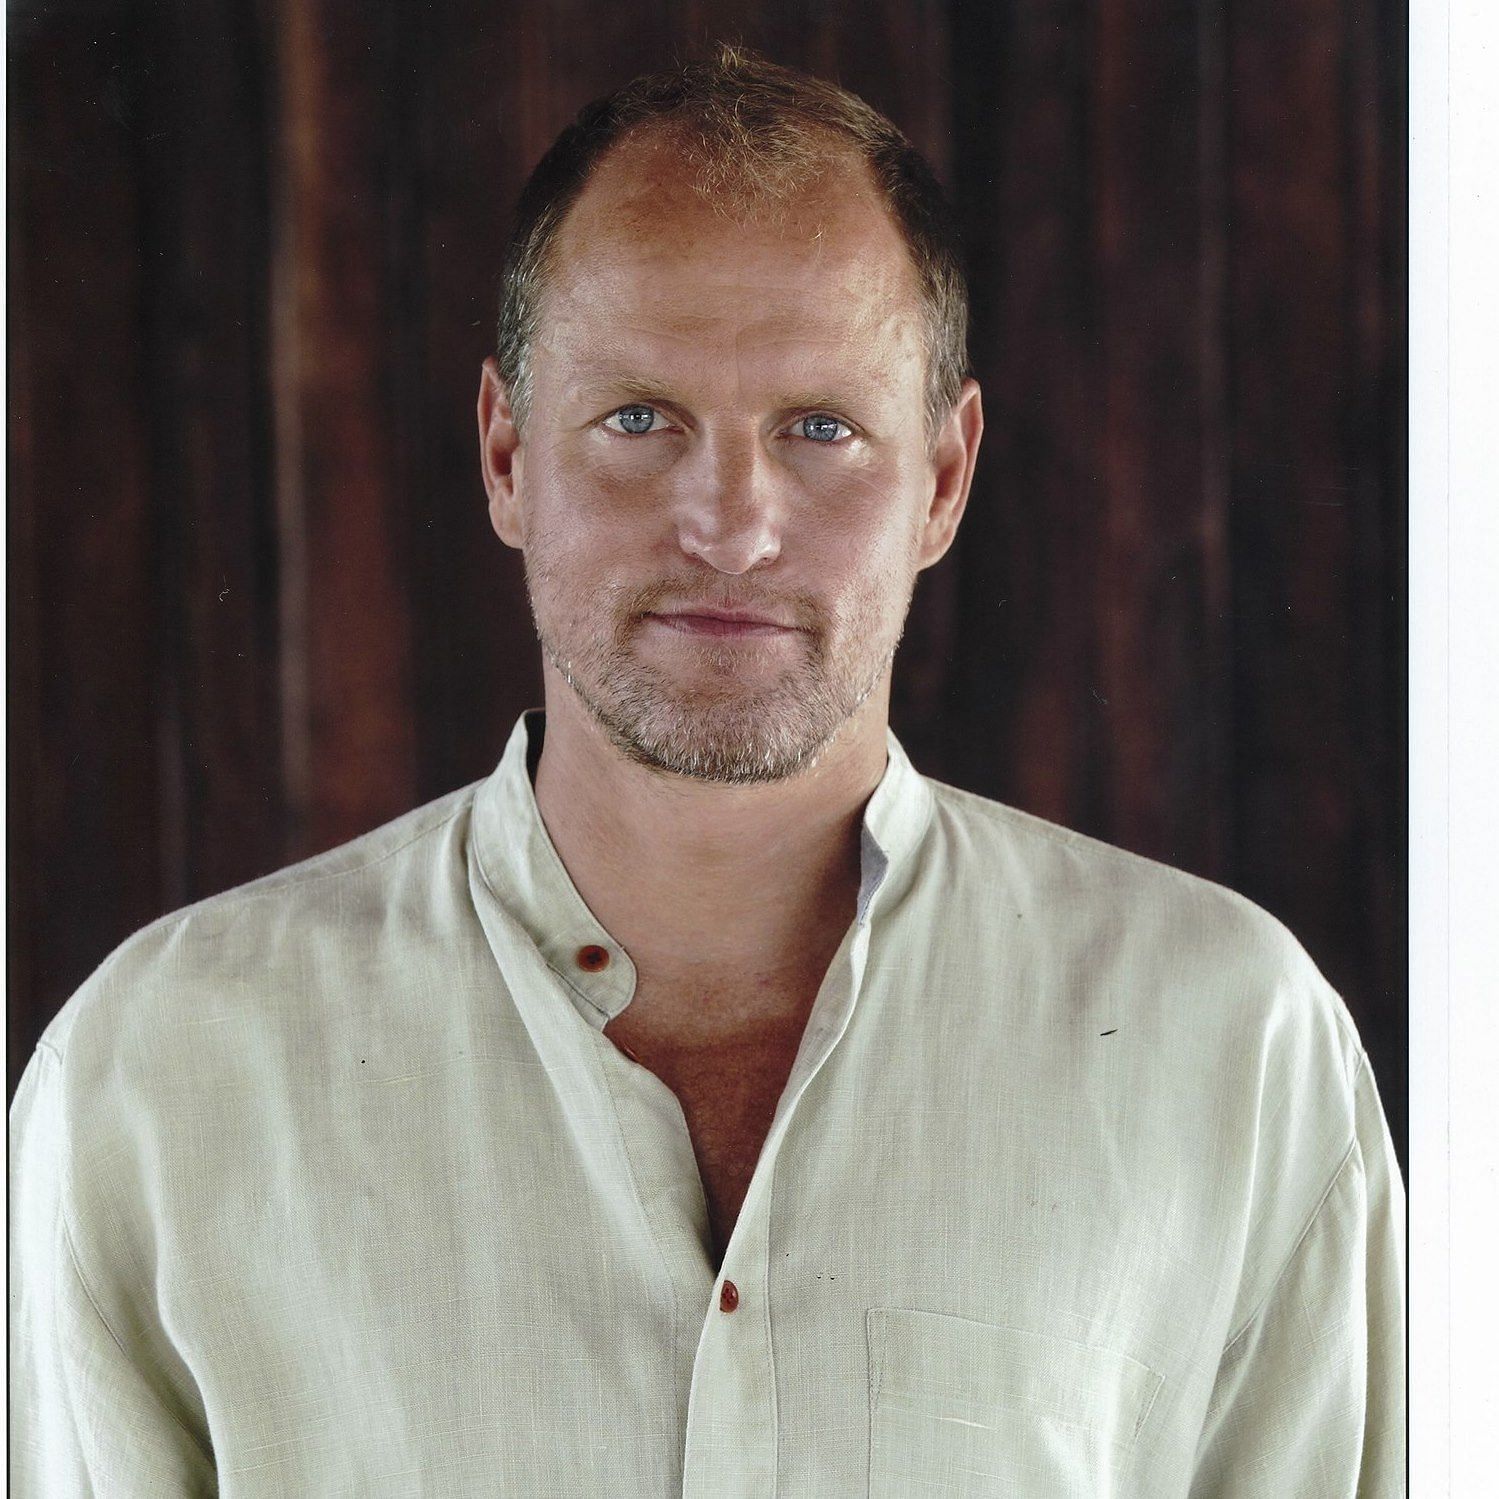 How tall is Woody Harrelson?